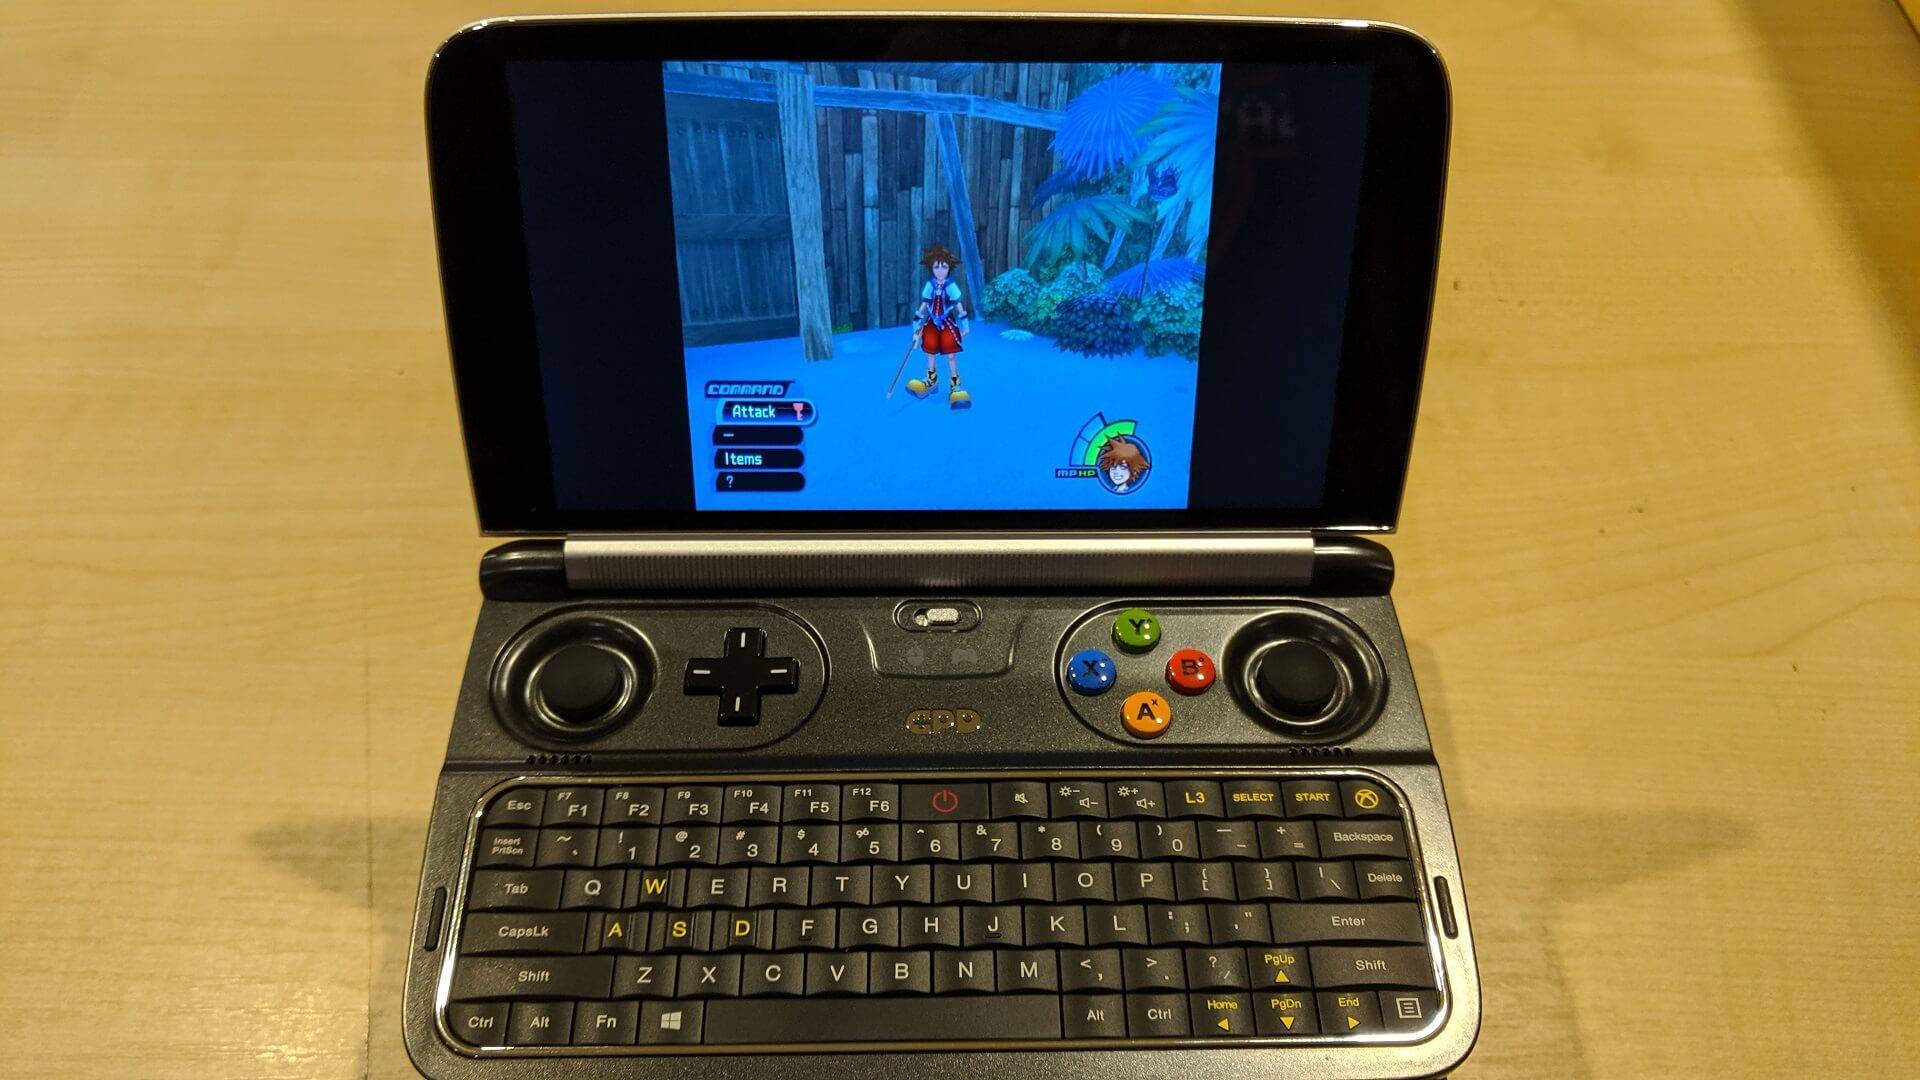 GPD Win 2 handheld gaming PC gets a spec bump (faster processor